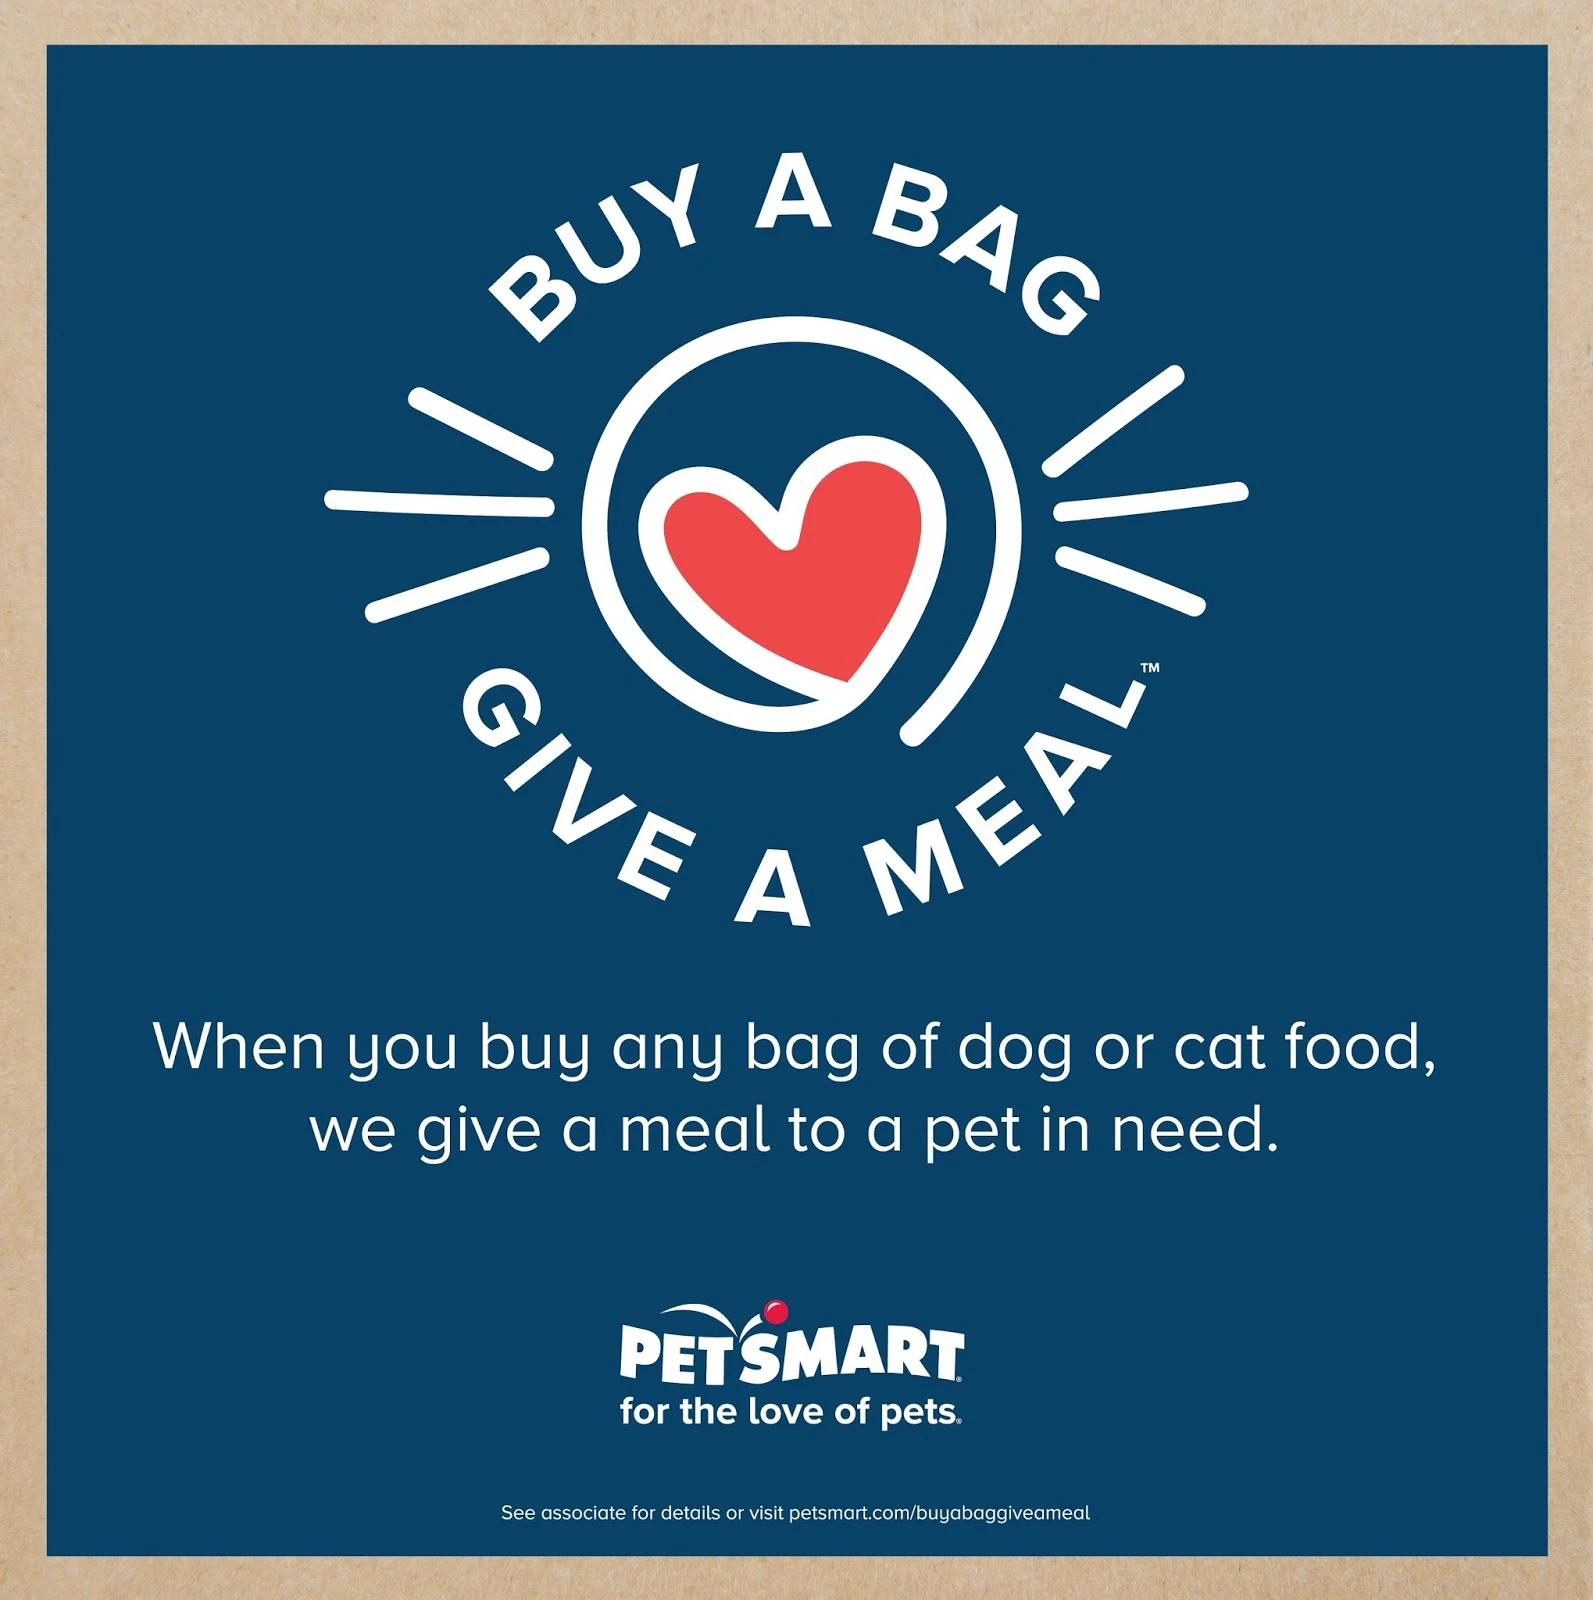 Help PetSmart Help Pets In Need. Buy a Bag, Give a Meal